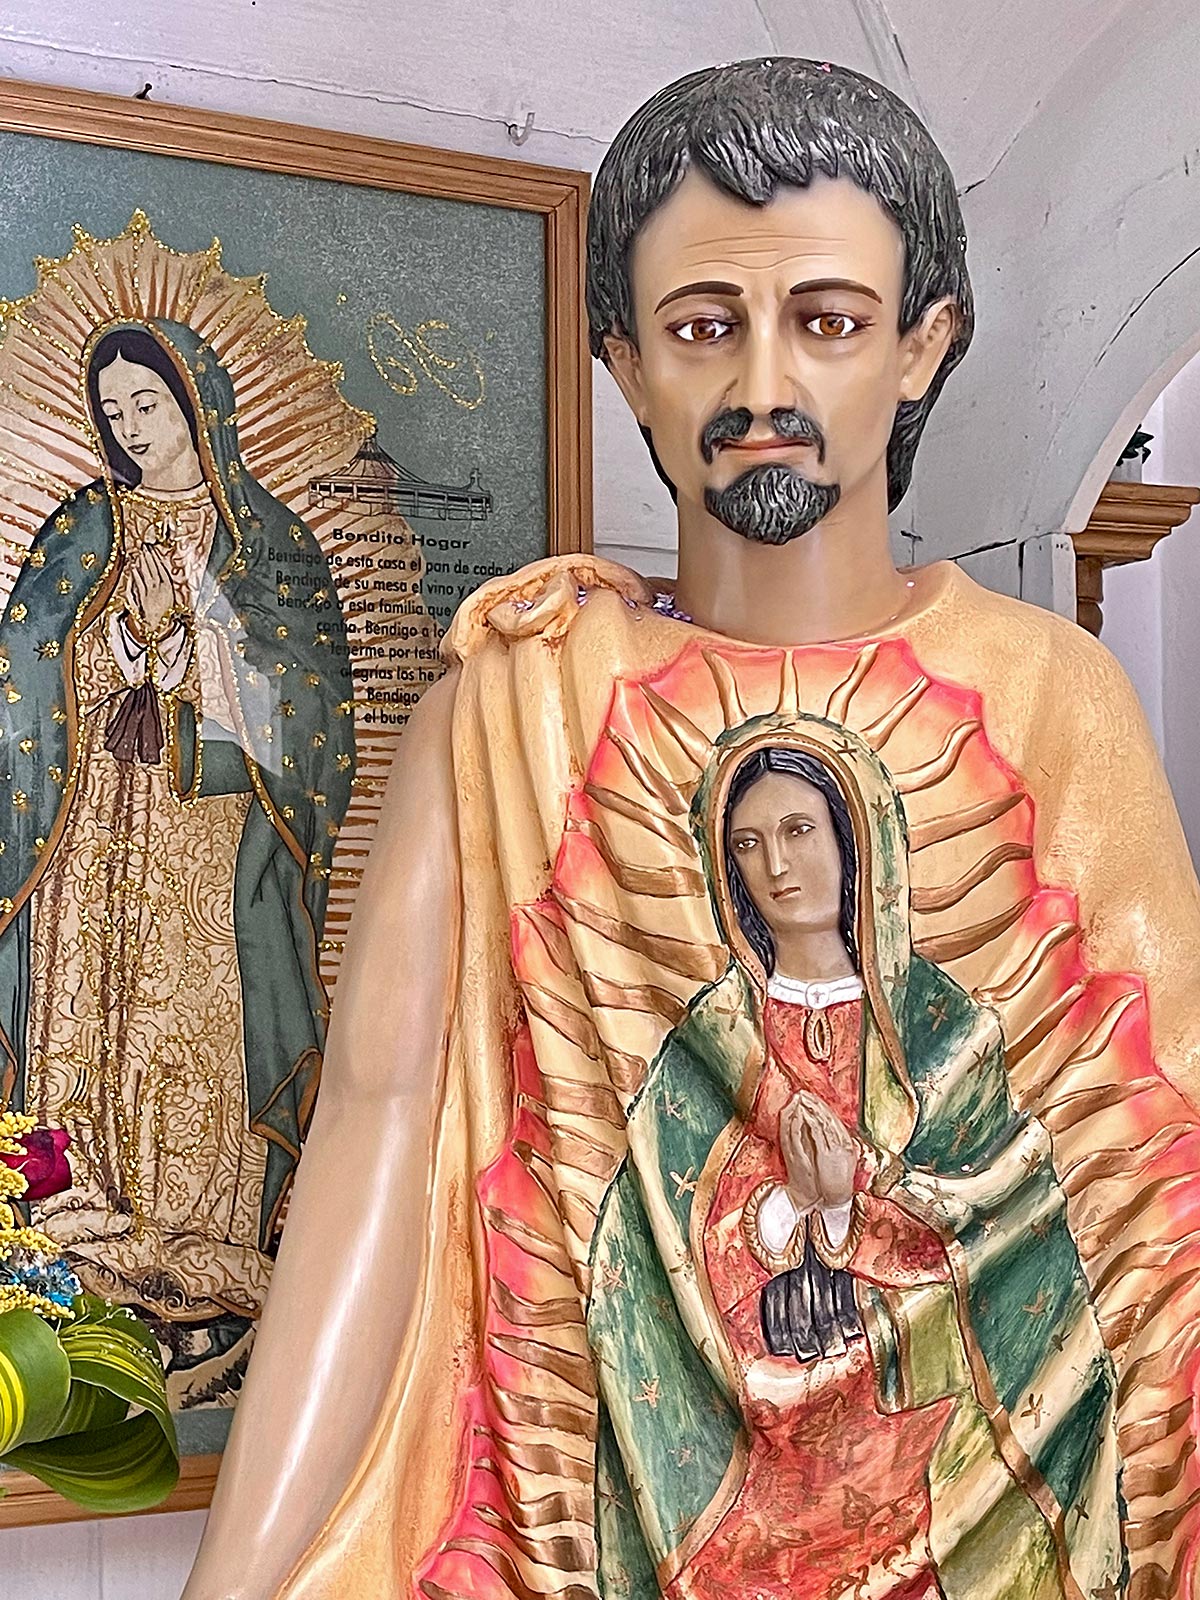 Statue of Juan Diego with miraculous image of Mary imprinted on his fabric cloak, Church of Guadalupe, San Cristobal